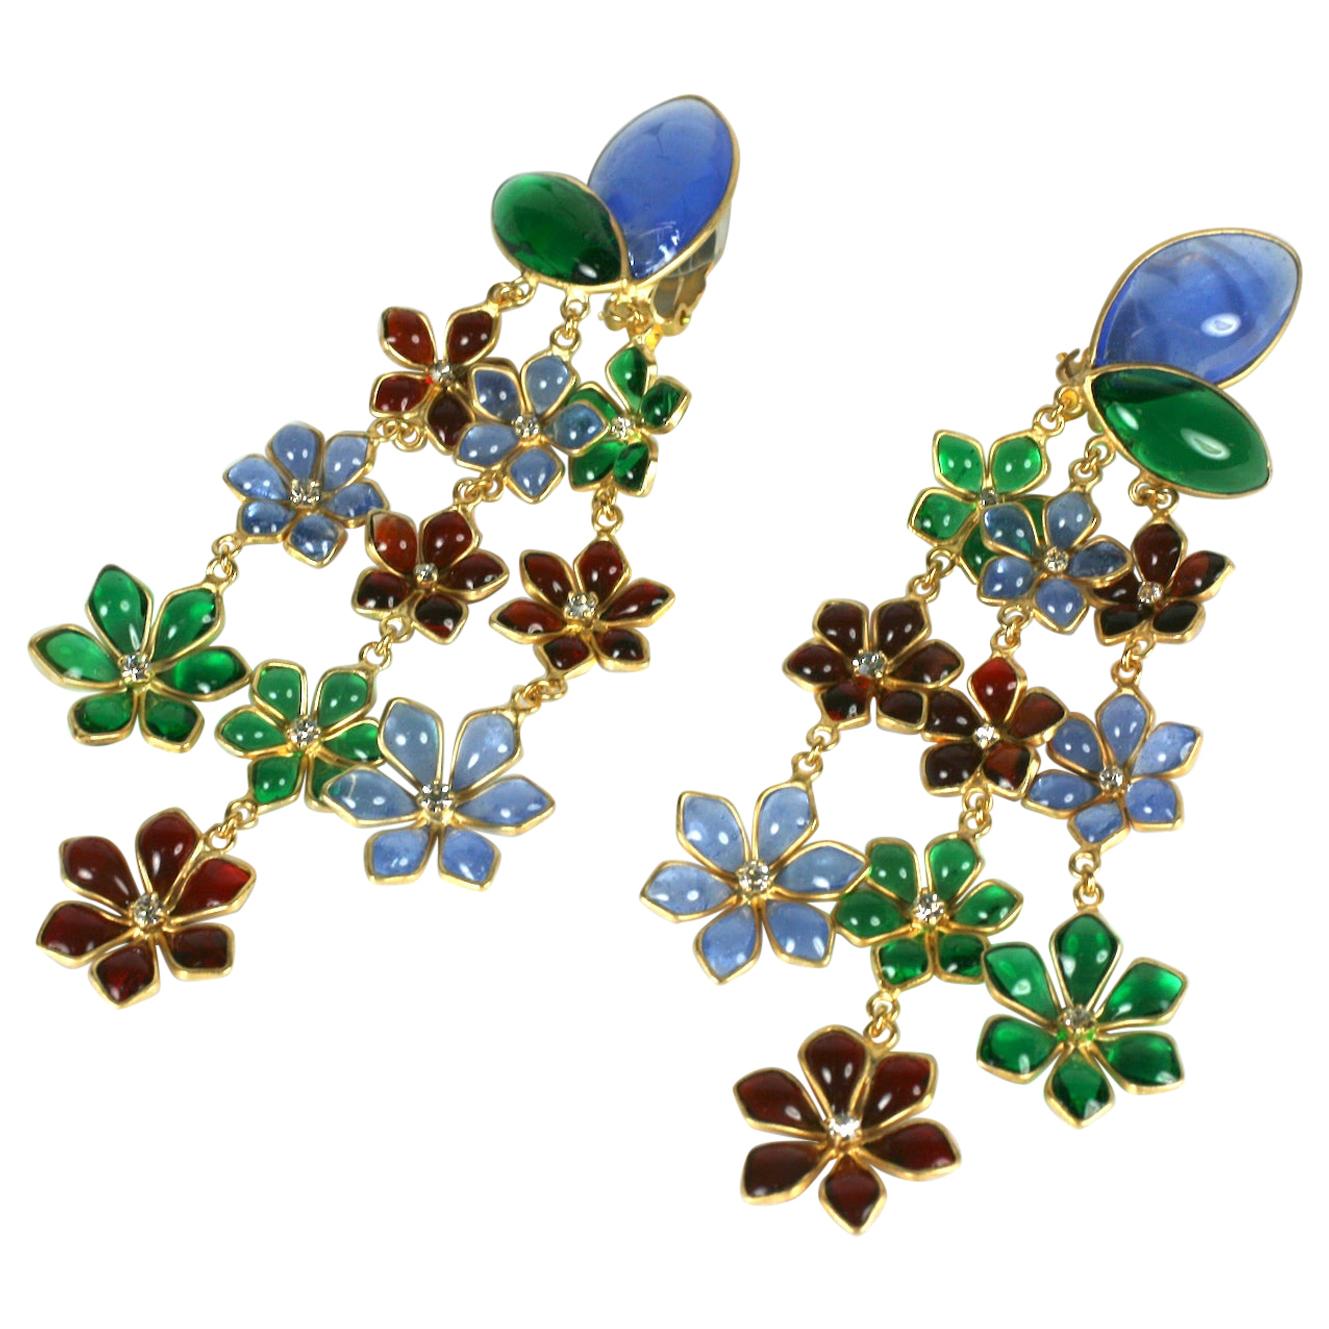  Maison Gripoix Anglo Indian Floral Cascade Earclips For Sale